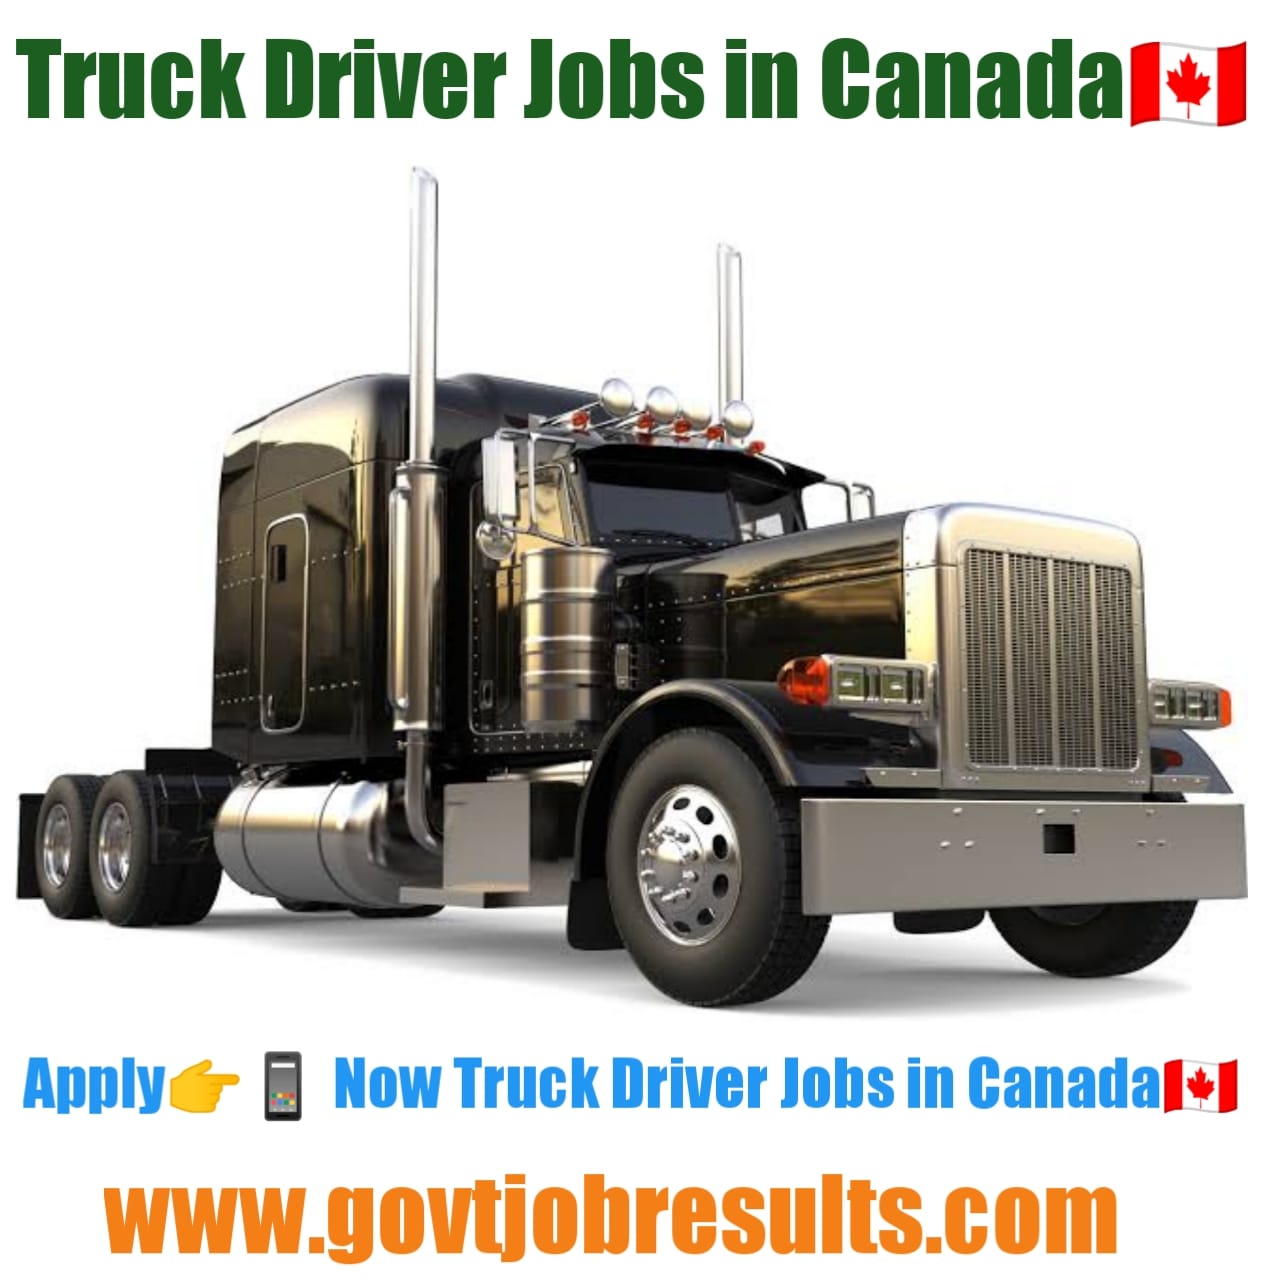 download the last version for apple Truck Driver Job